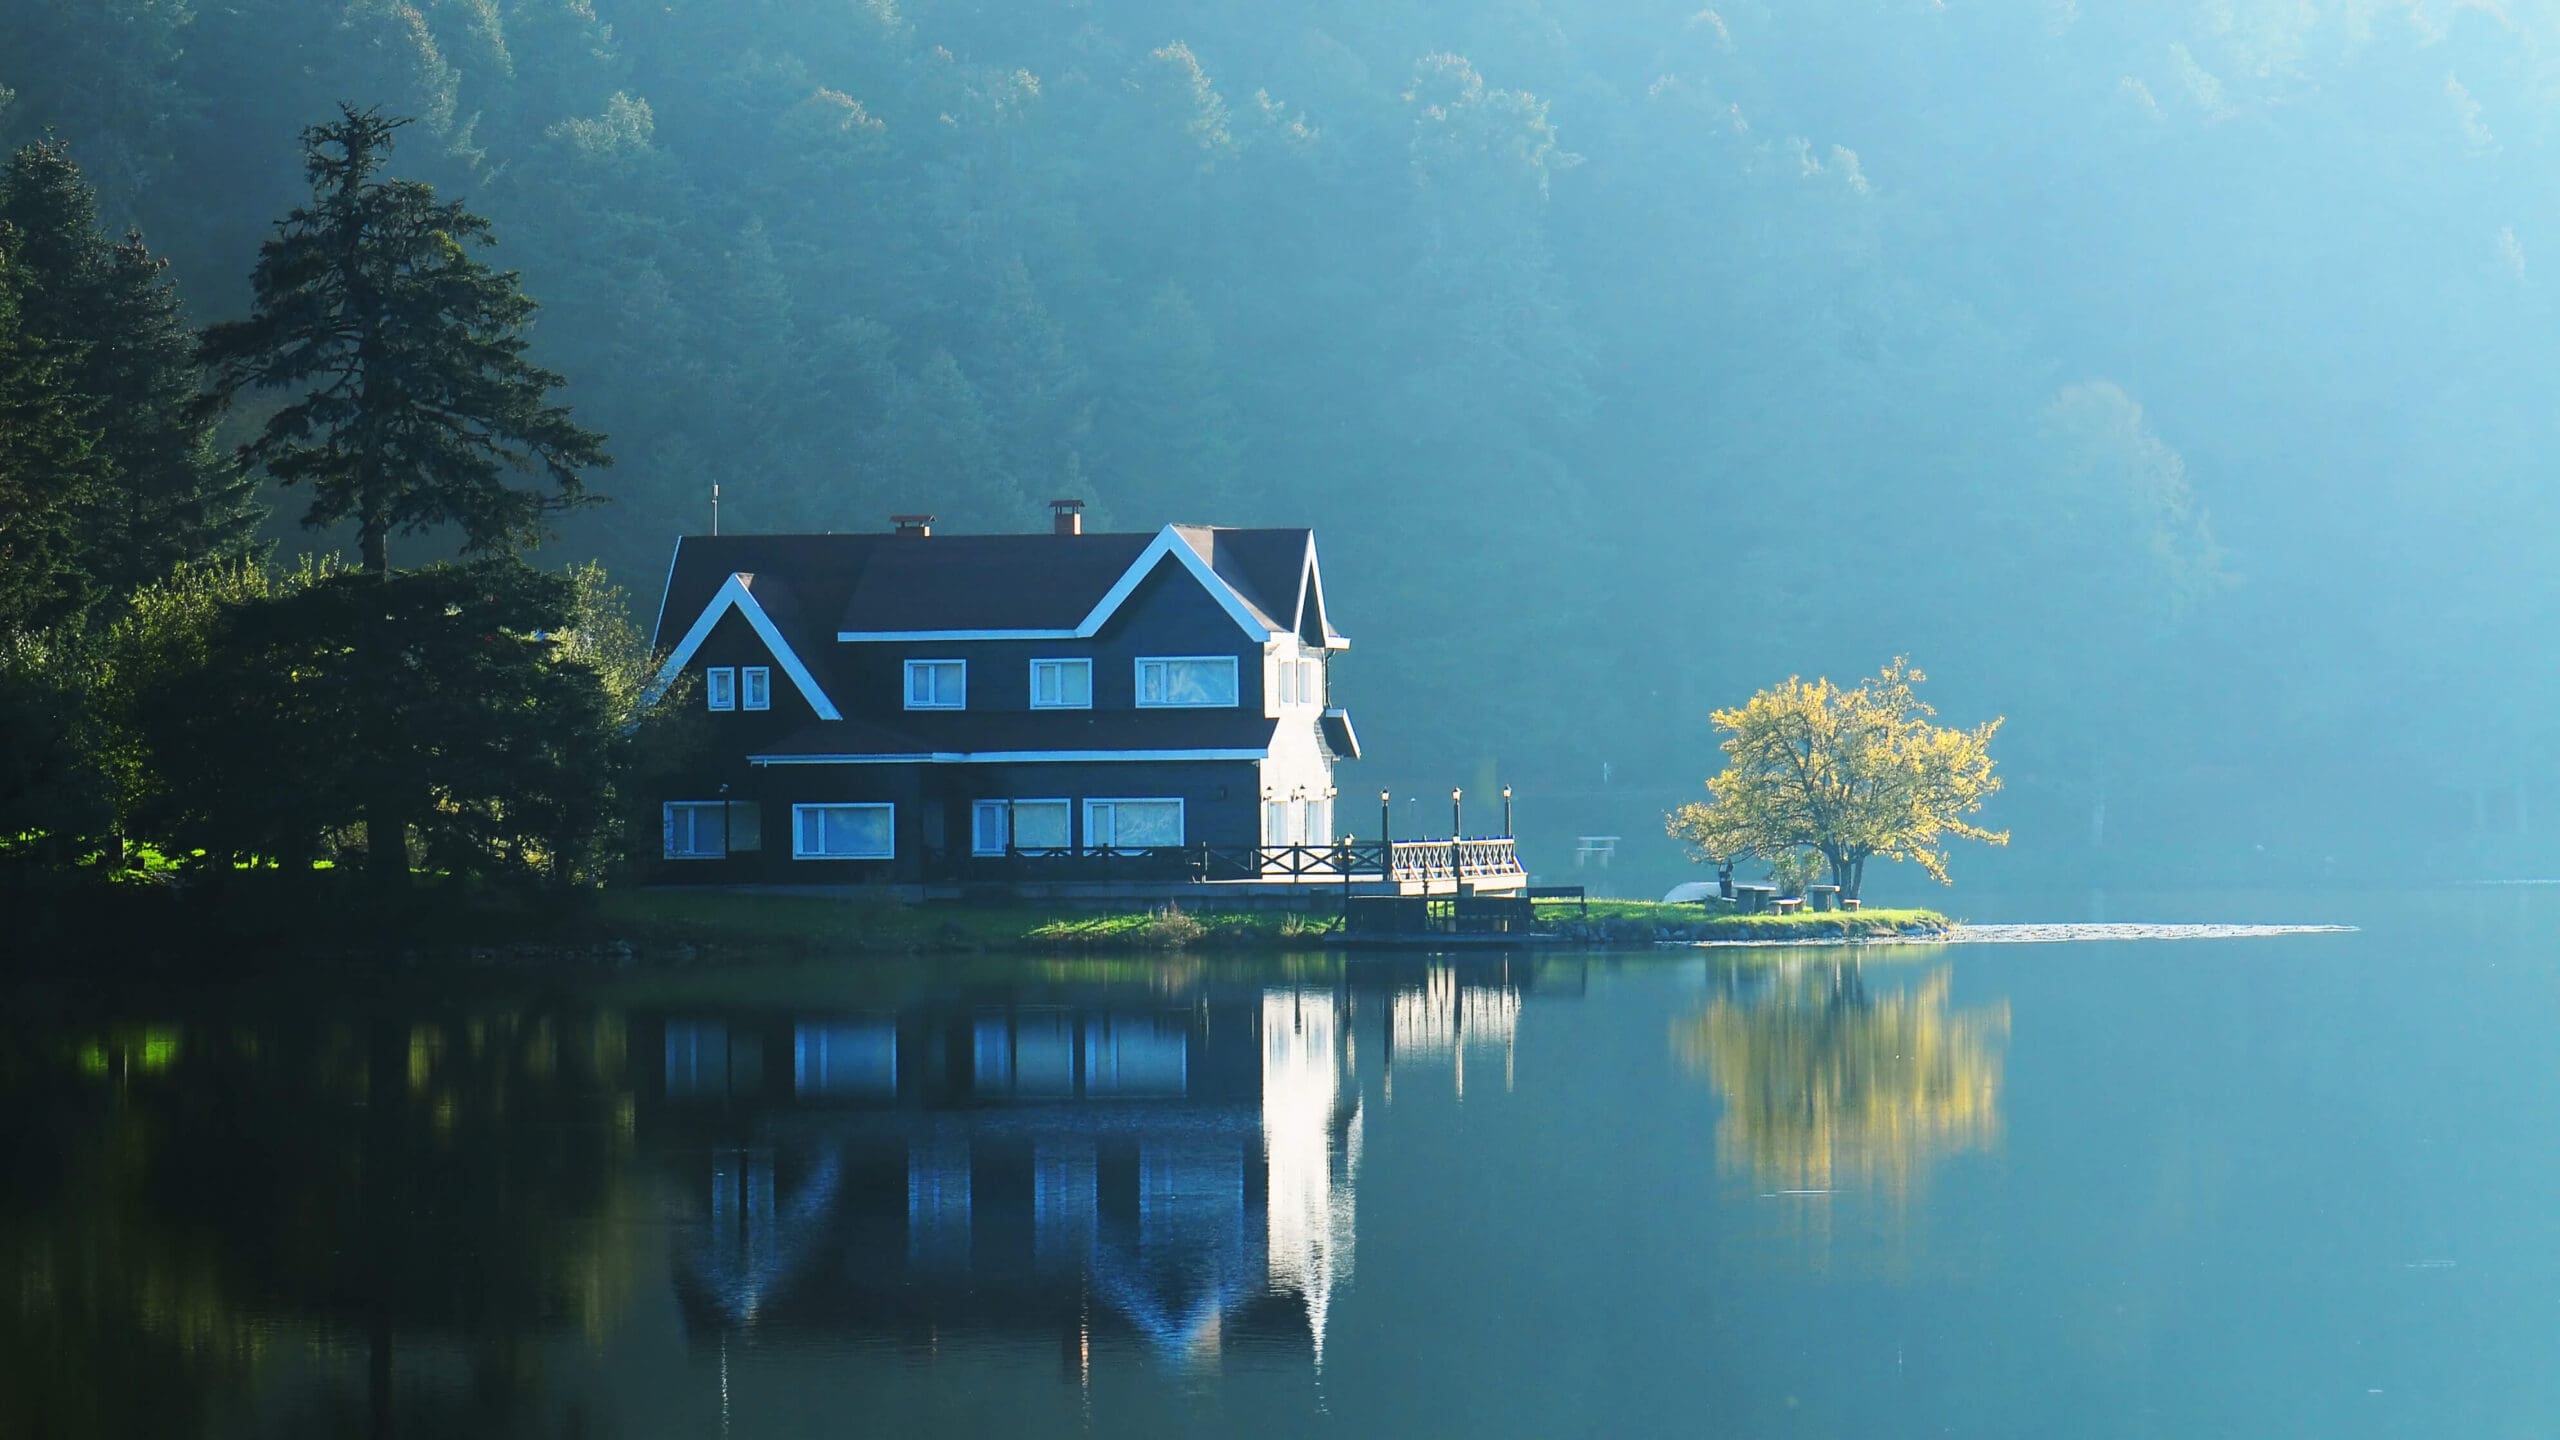 What is a Data Lakehouse?